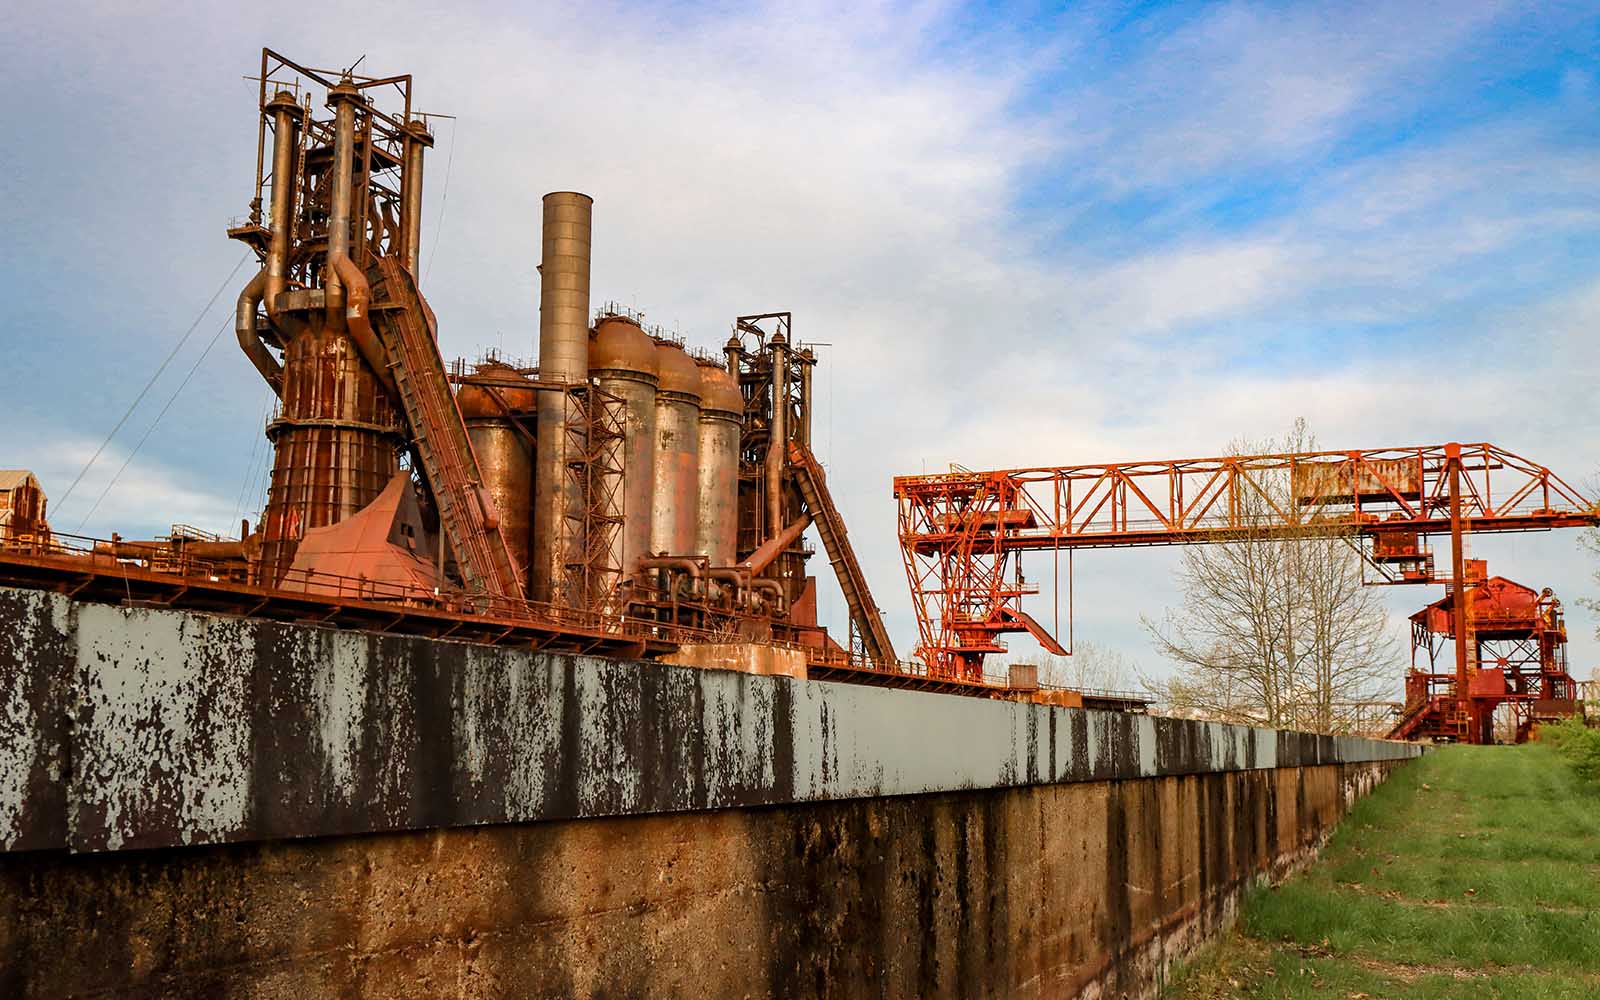 A landscape image of the Carrie Furnaces at sunset with a gritty wall in the foreground.